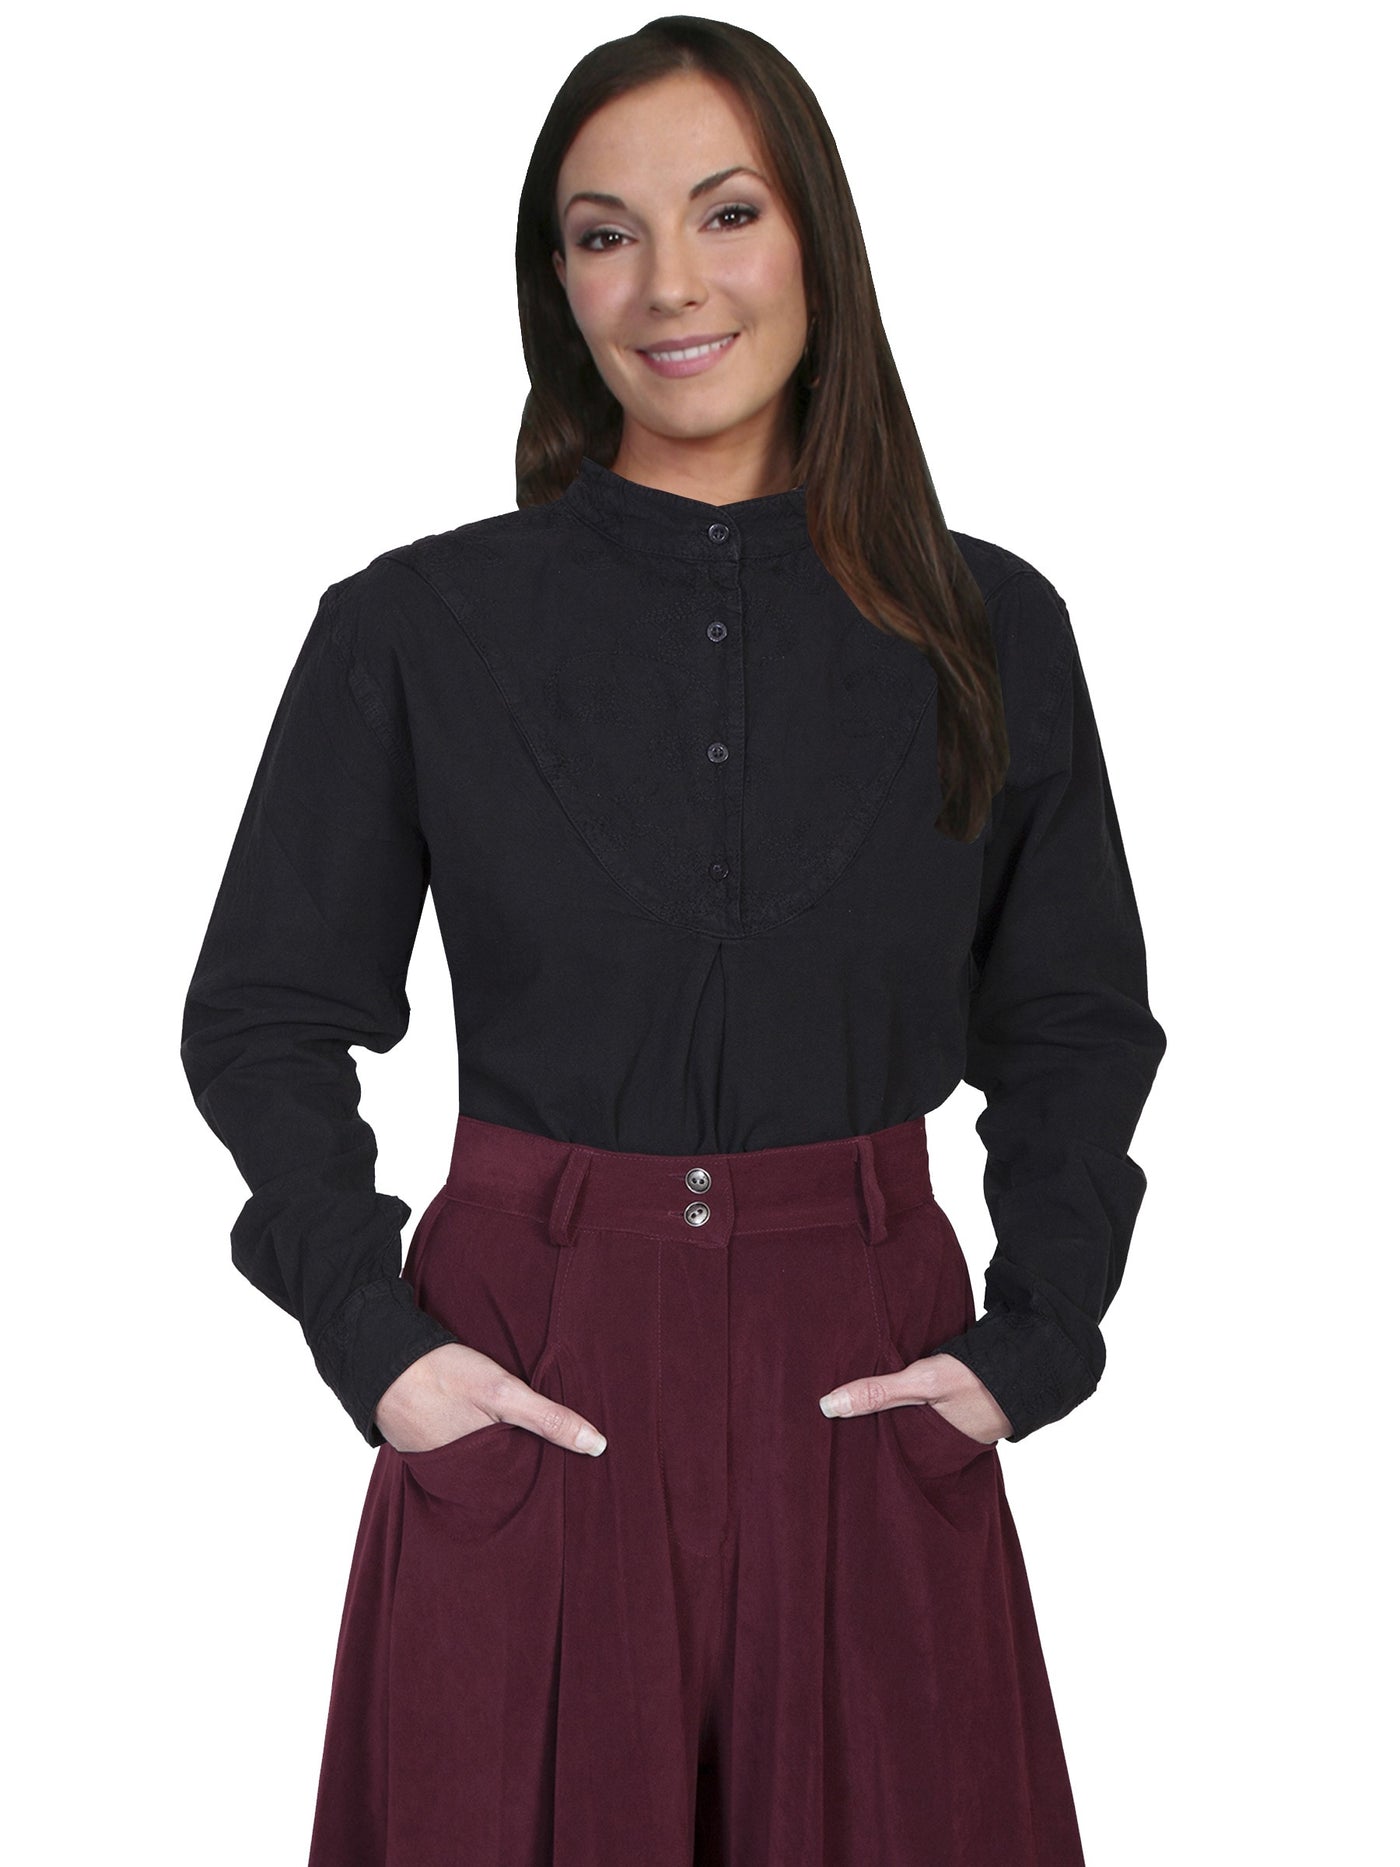 Farmhouse Style Blouse in Black - SOLD OUT